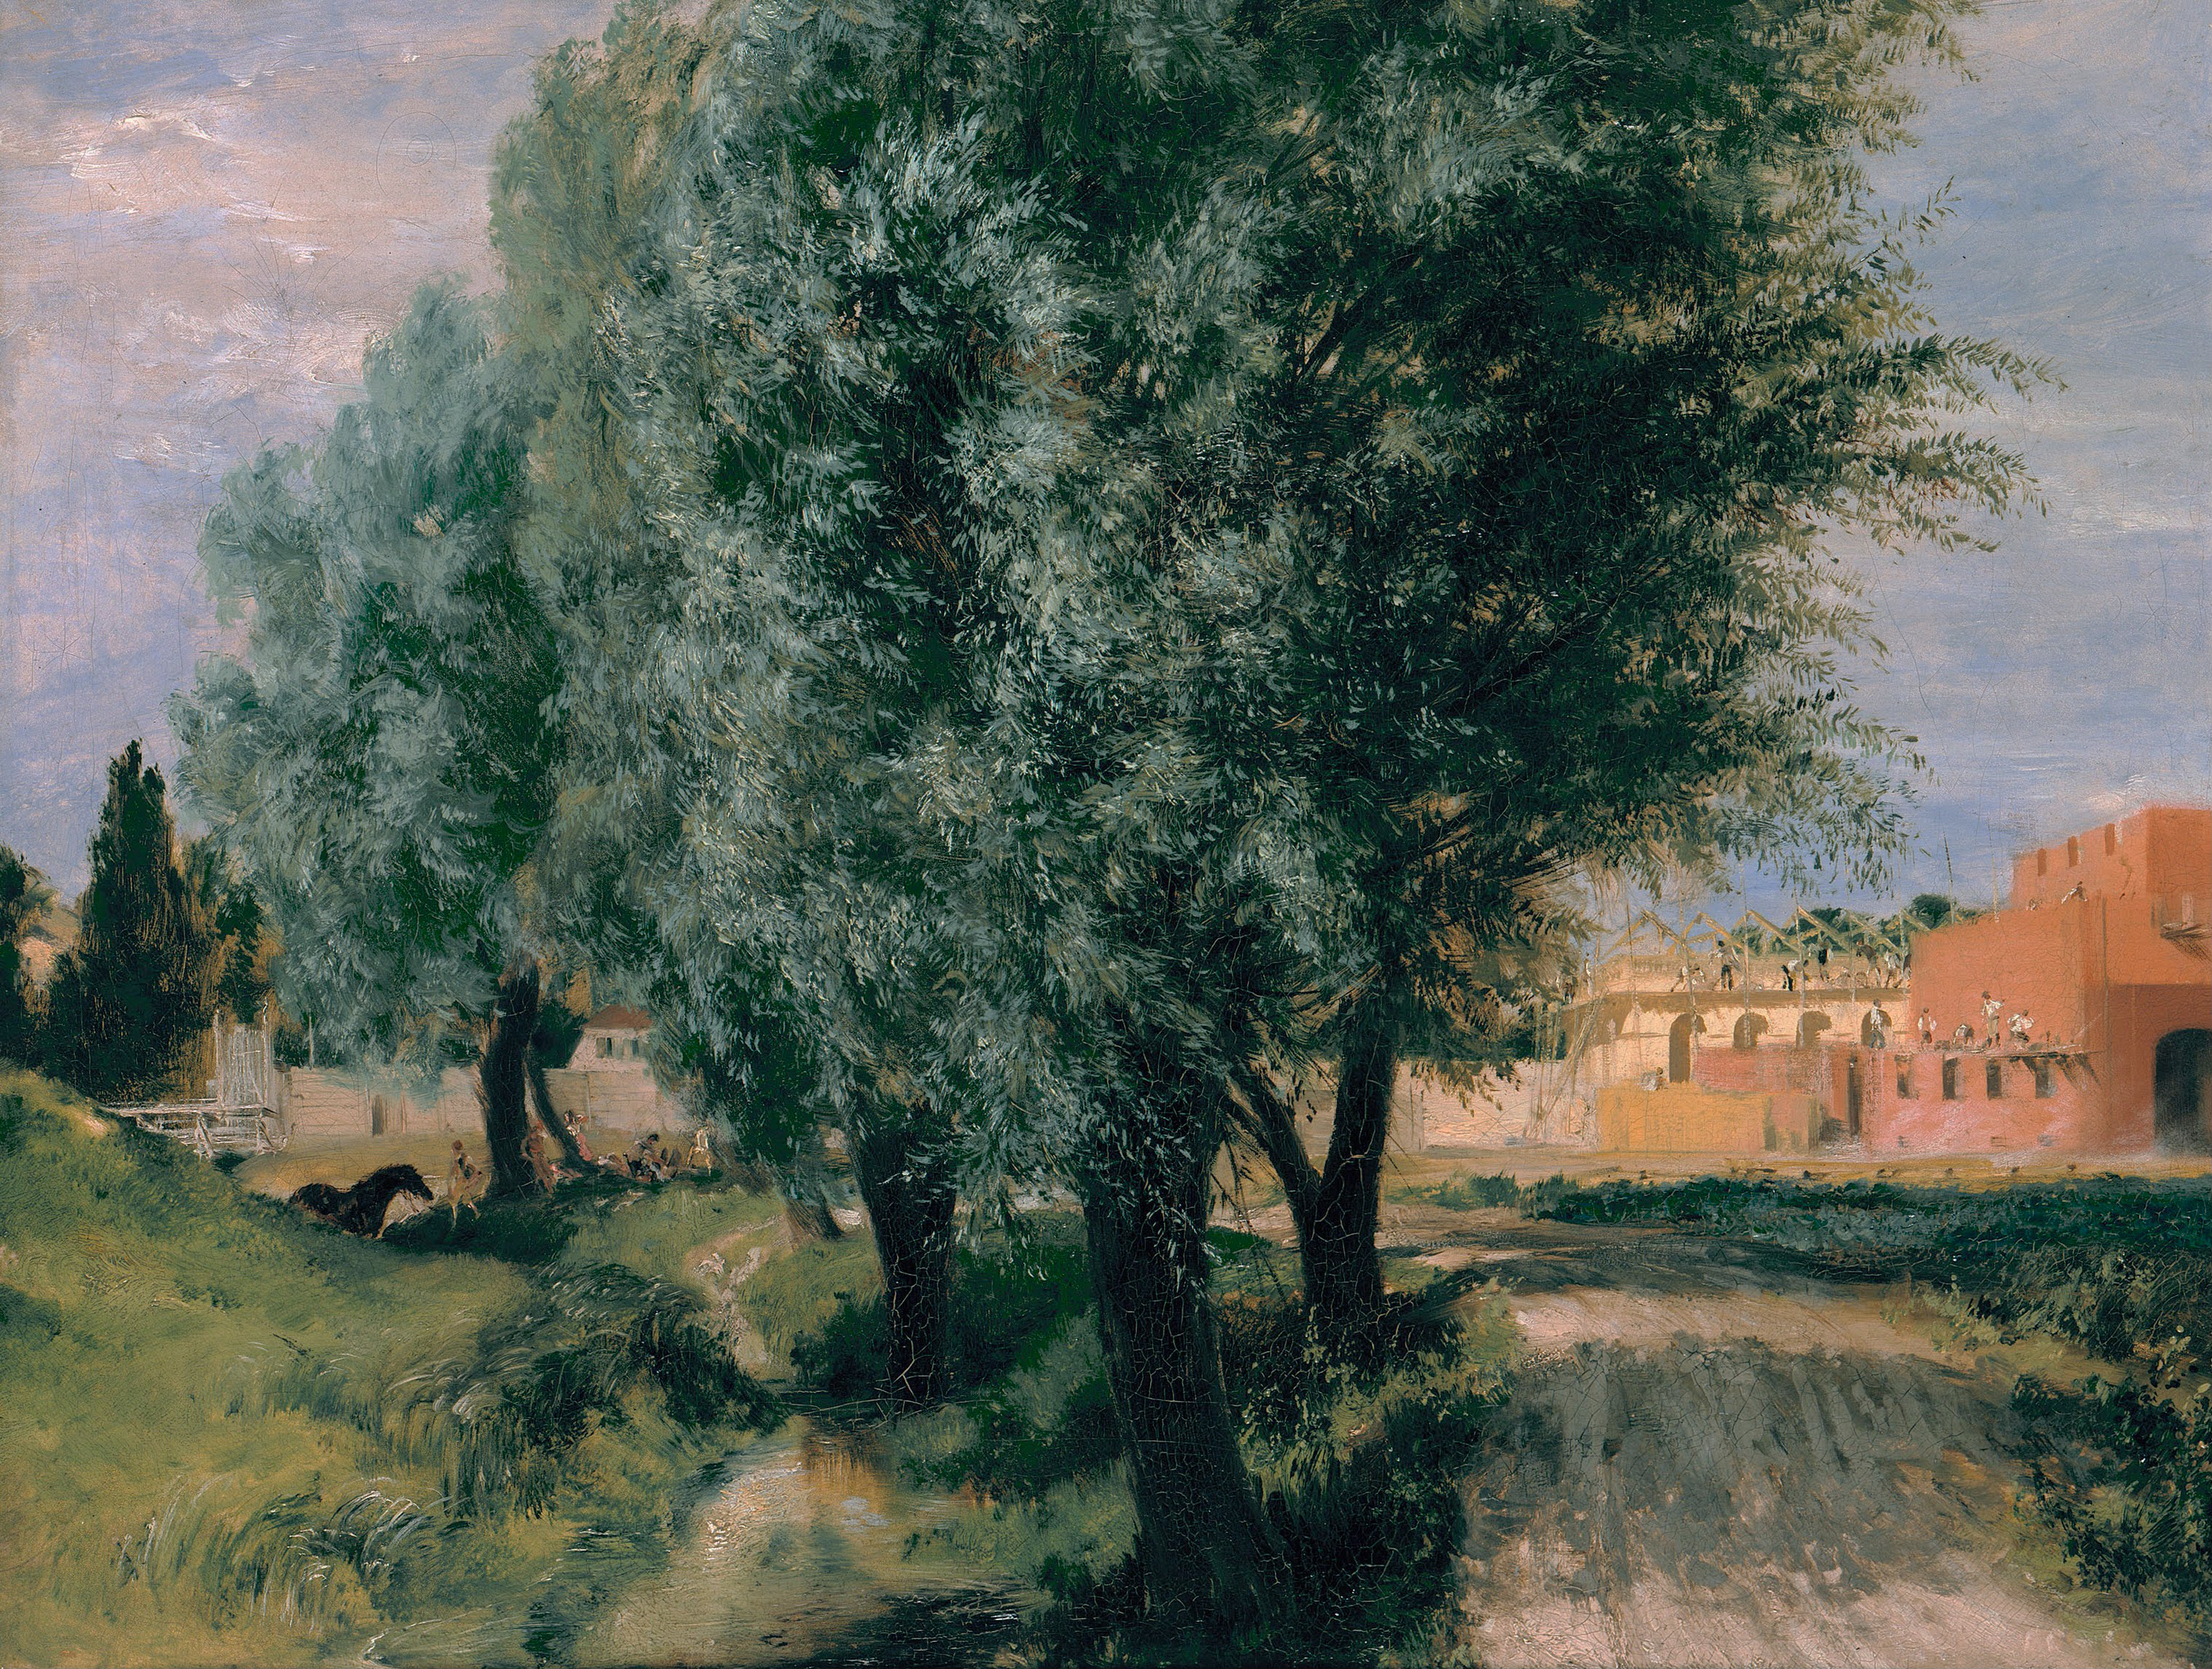 0819_Adolf menzel_Building Site with Willows 썸네일